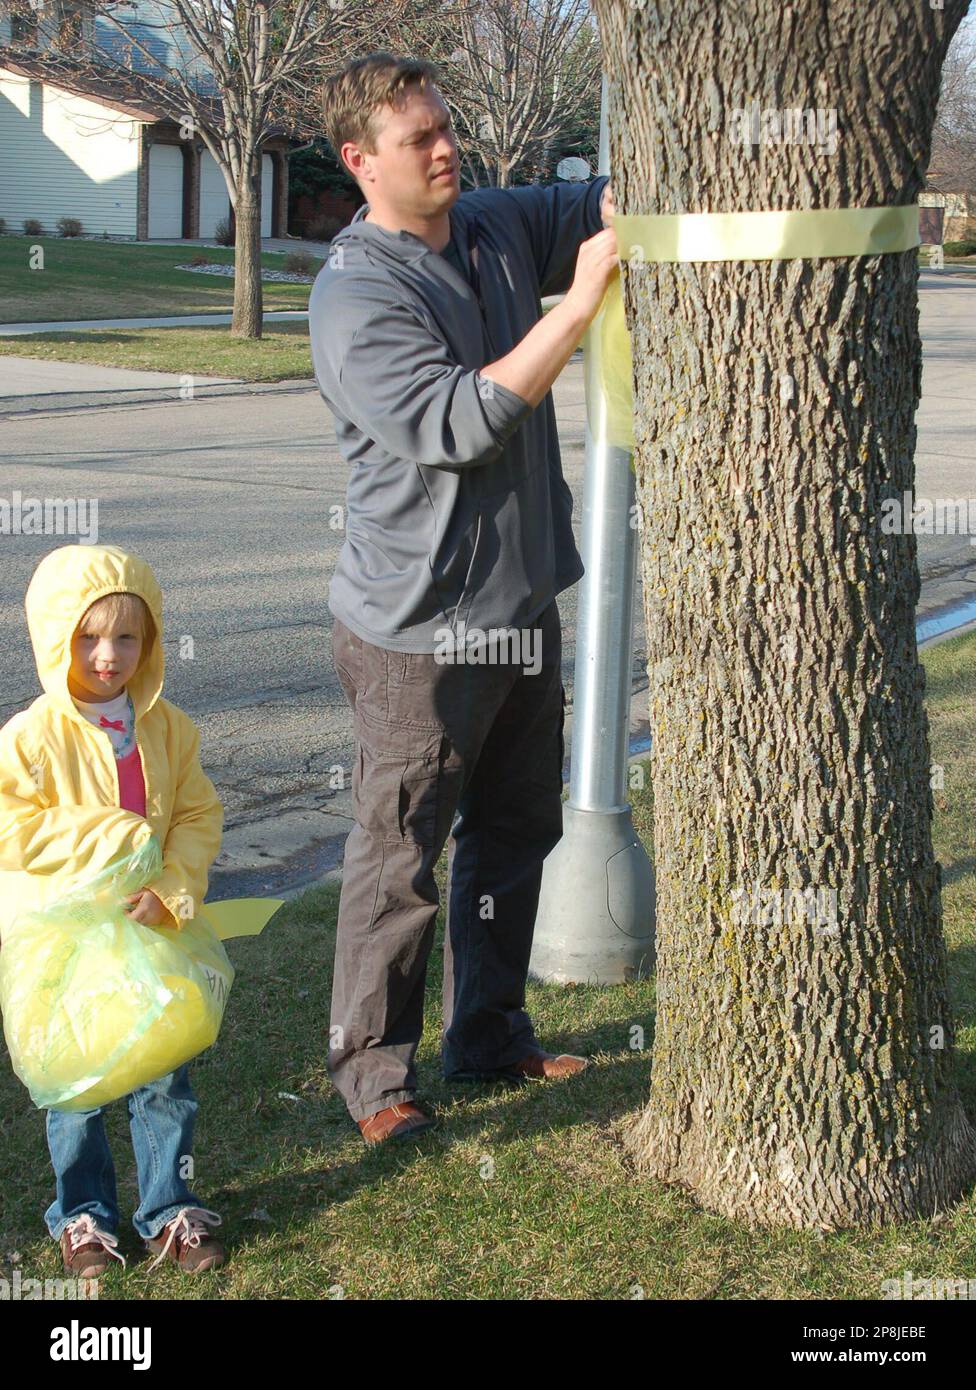 Arrick Olson and his daughter, Evie, tie ribbons around trees in north  Fargo, N.D., Tuesday, April 21, 2009, in support of Roxana Saberi. Saberi,  who grew up in Fargo, was convicted of